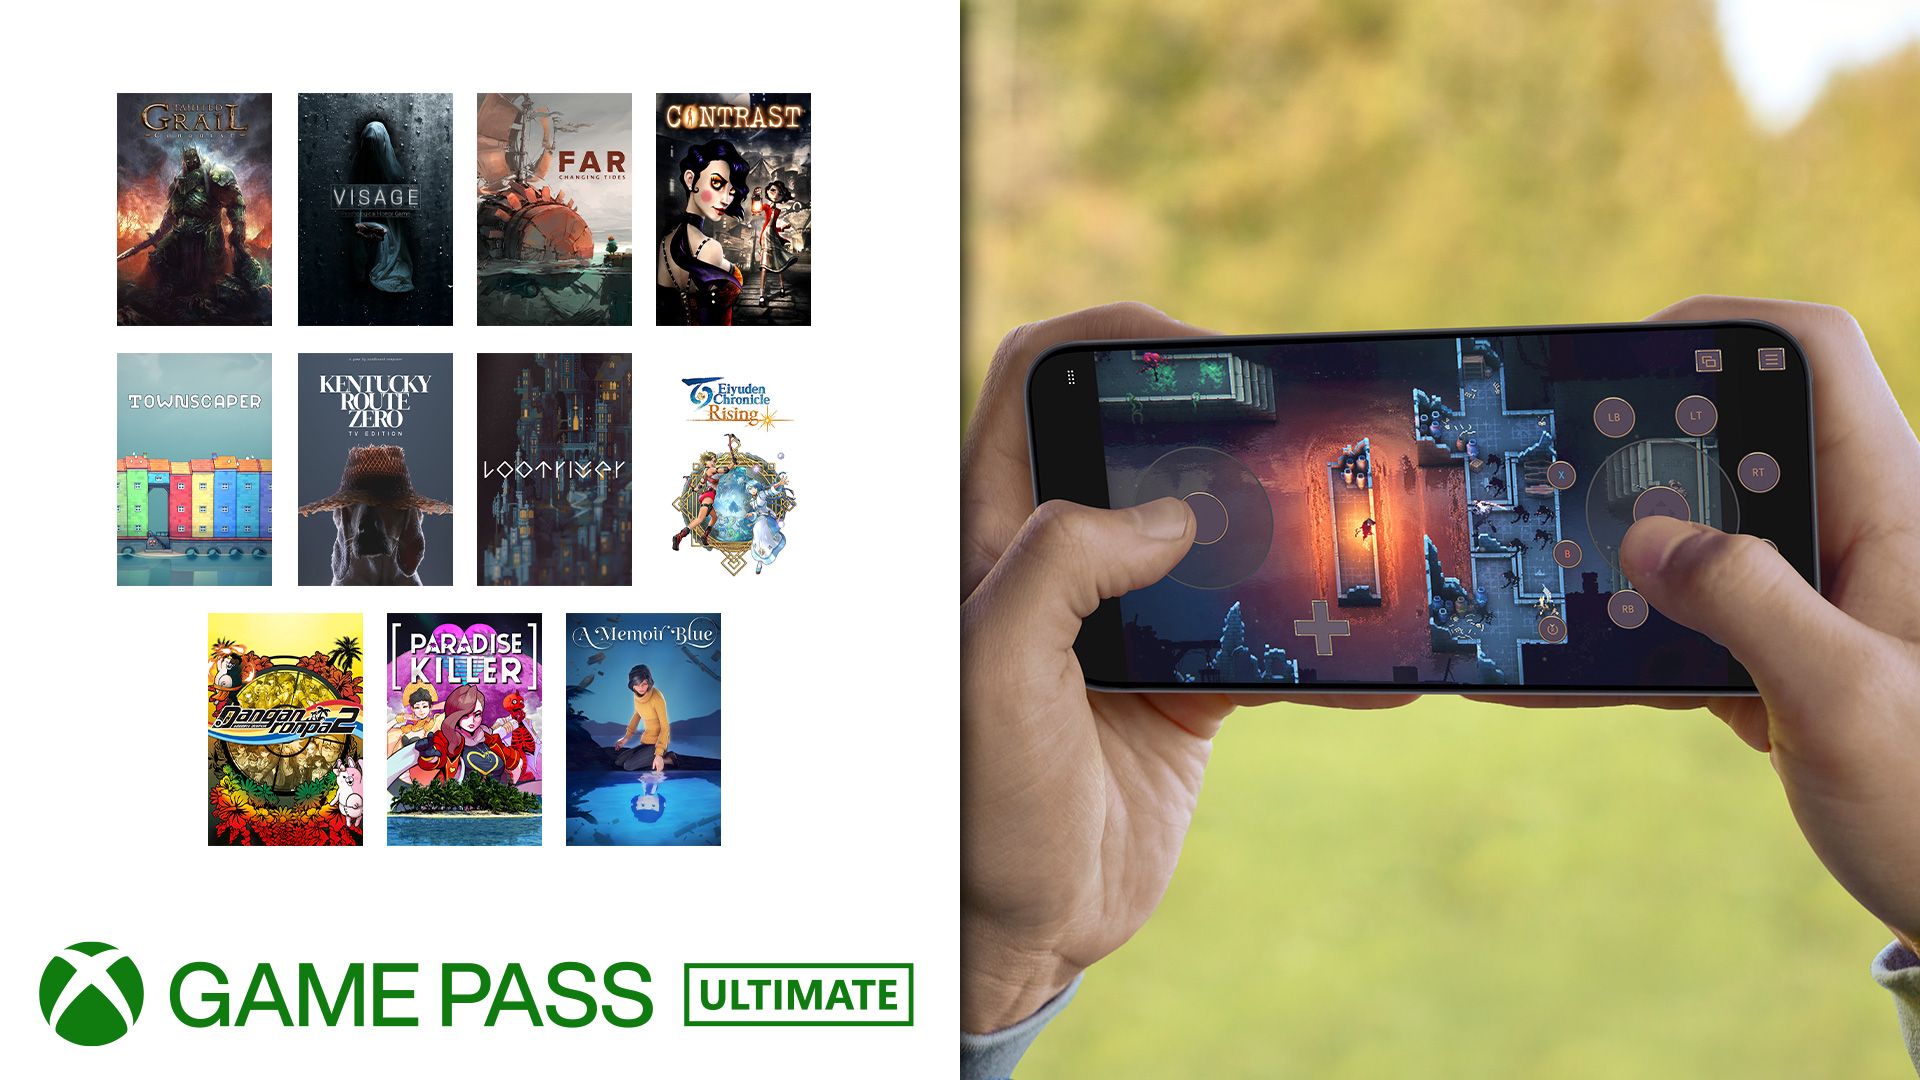 Xbox Game Pass adds Spotify Premium, 6 new games coming soon -  GameRevolution